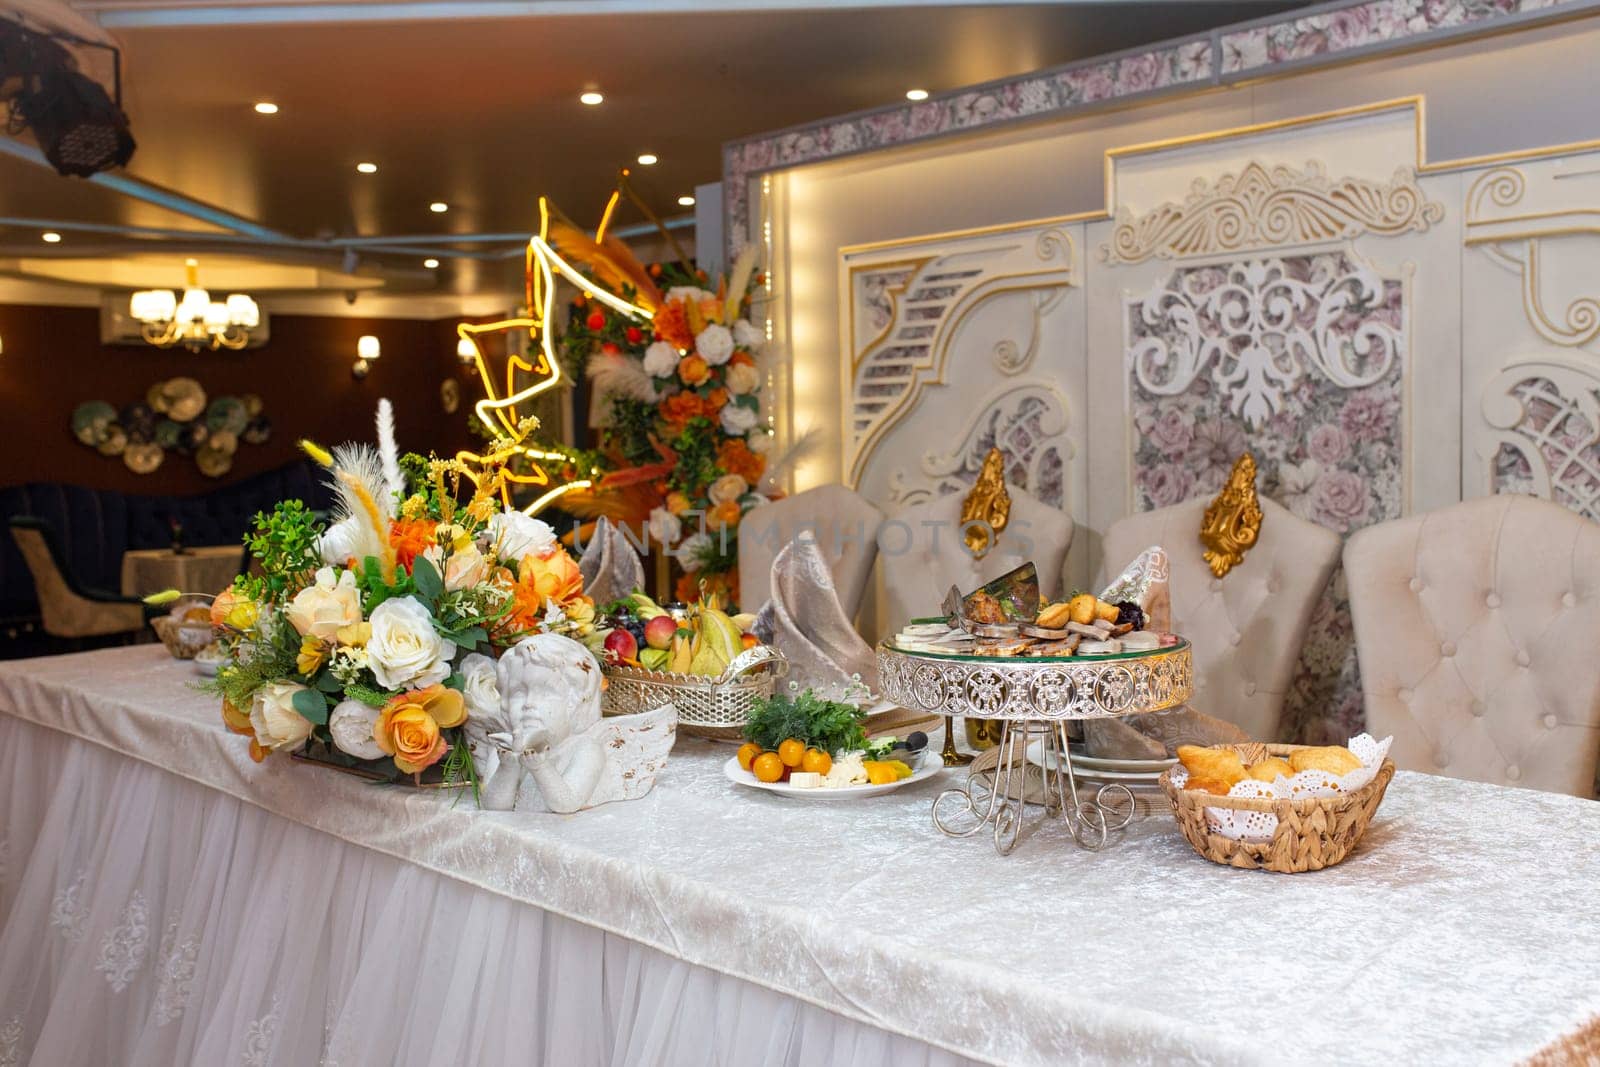 A beautifully decorated wedding table with a centerpiece of flowers and fruit, elegant chairs, and a shimmering chandelier above, creating a magical ambiance for the special occasion.